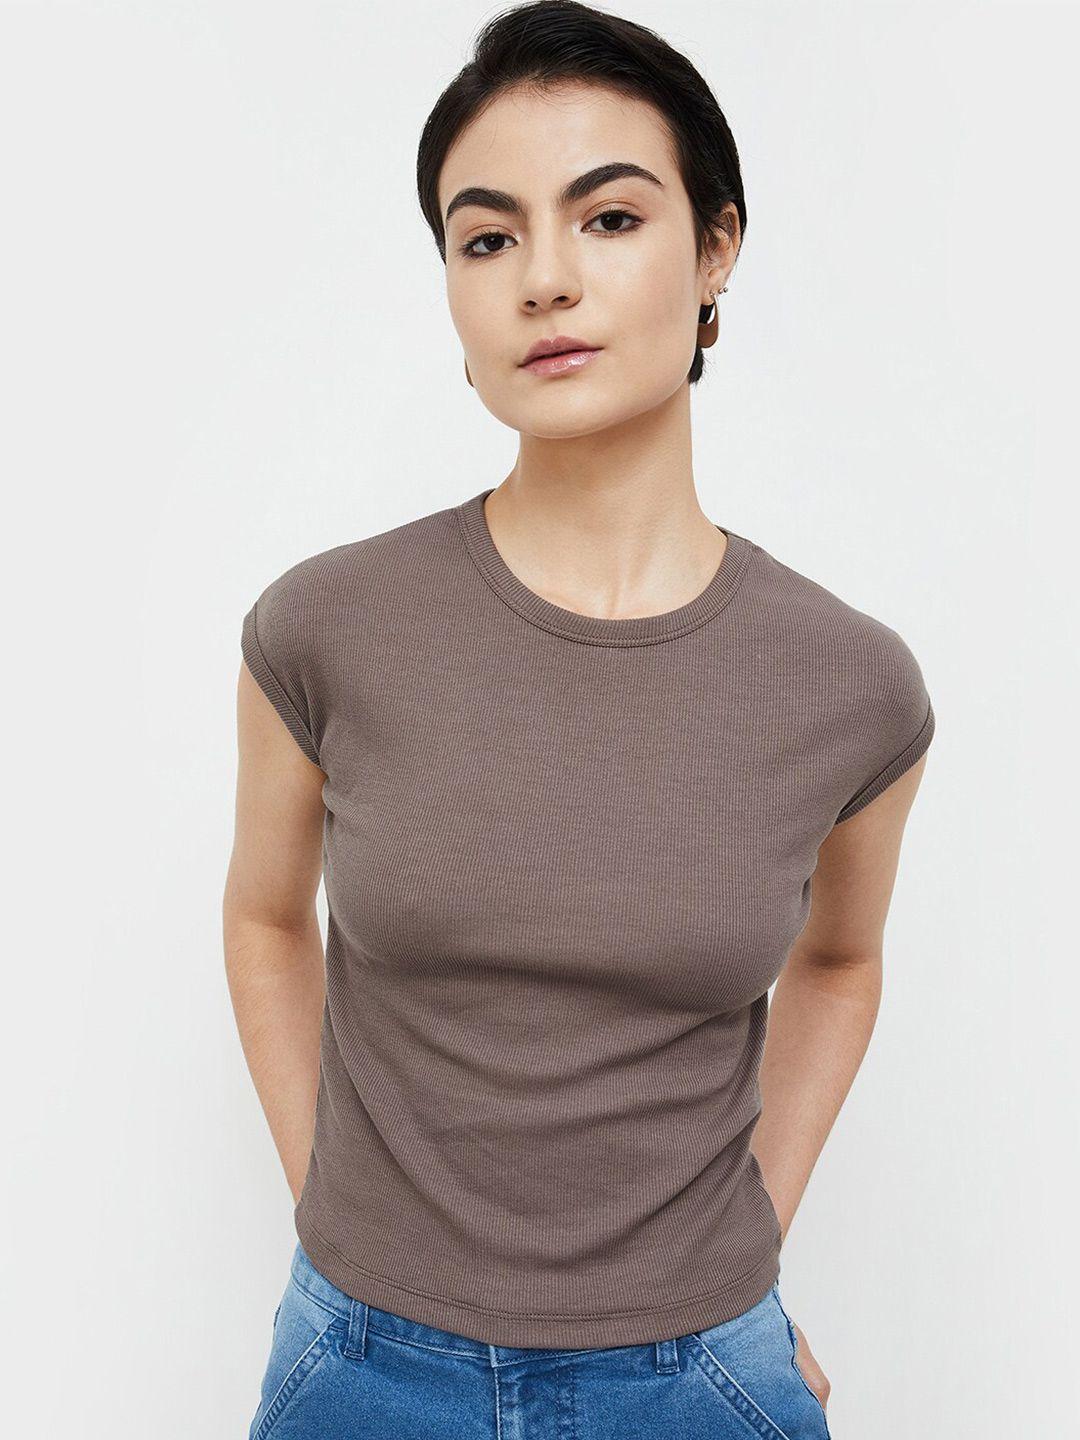 ginger-by-lifestyle-extended-sleeves-cotton-top